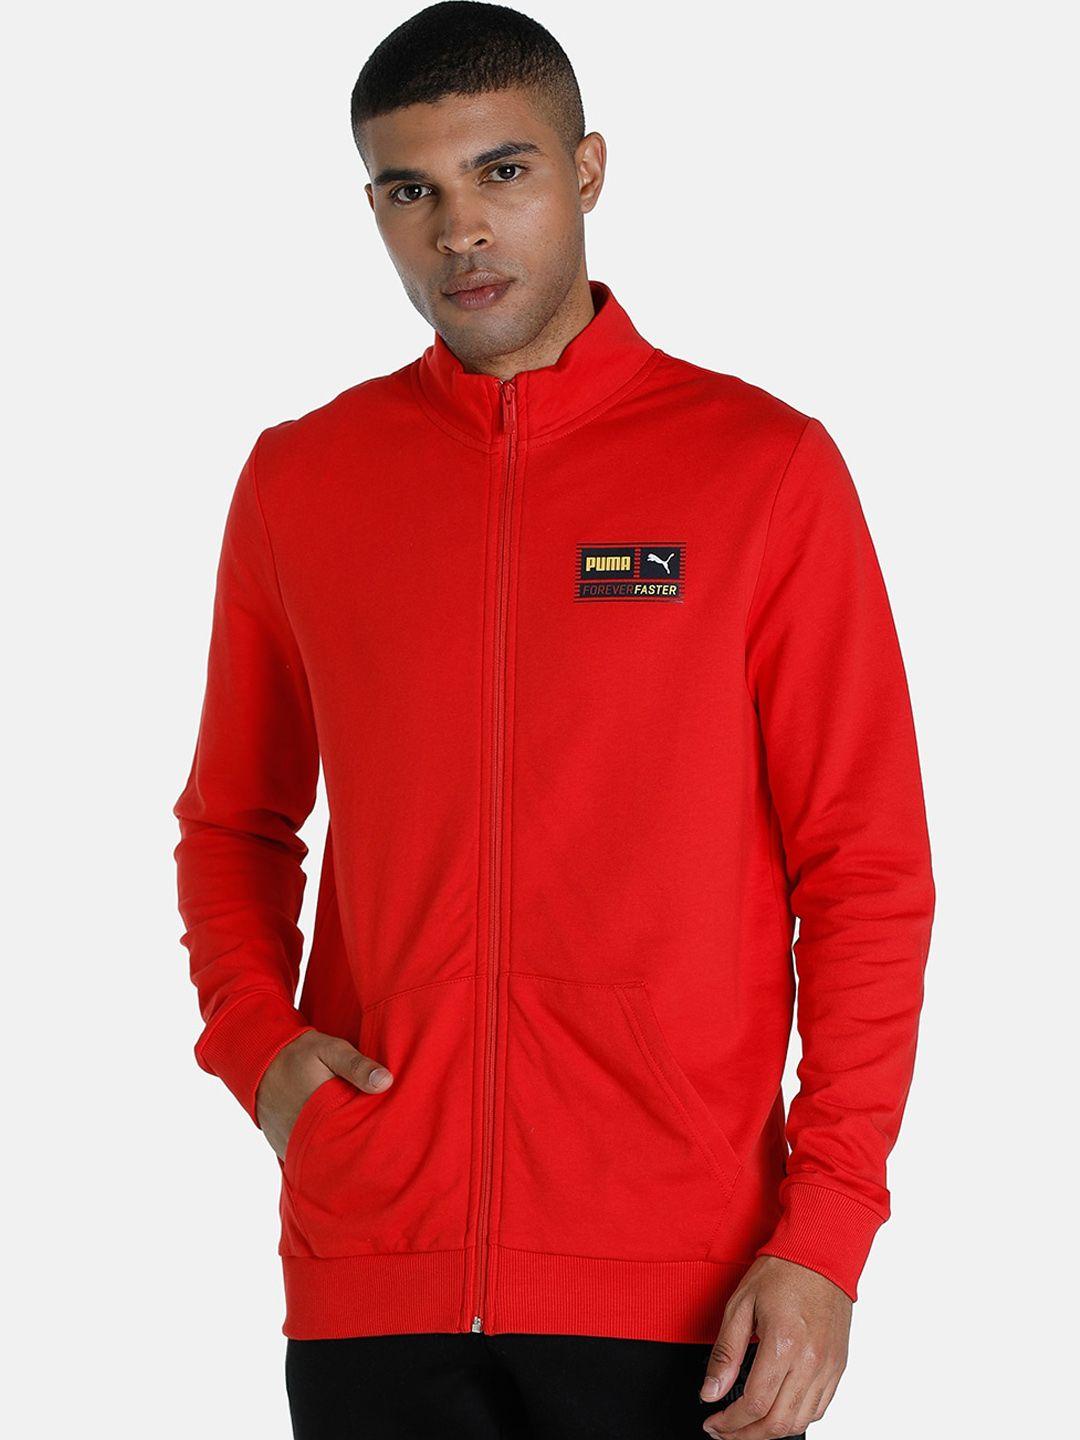 puma-men-red-outdoor-sporty-jacket-with-patchwork